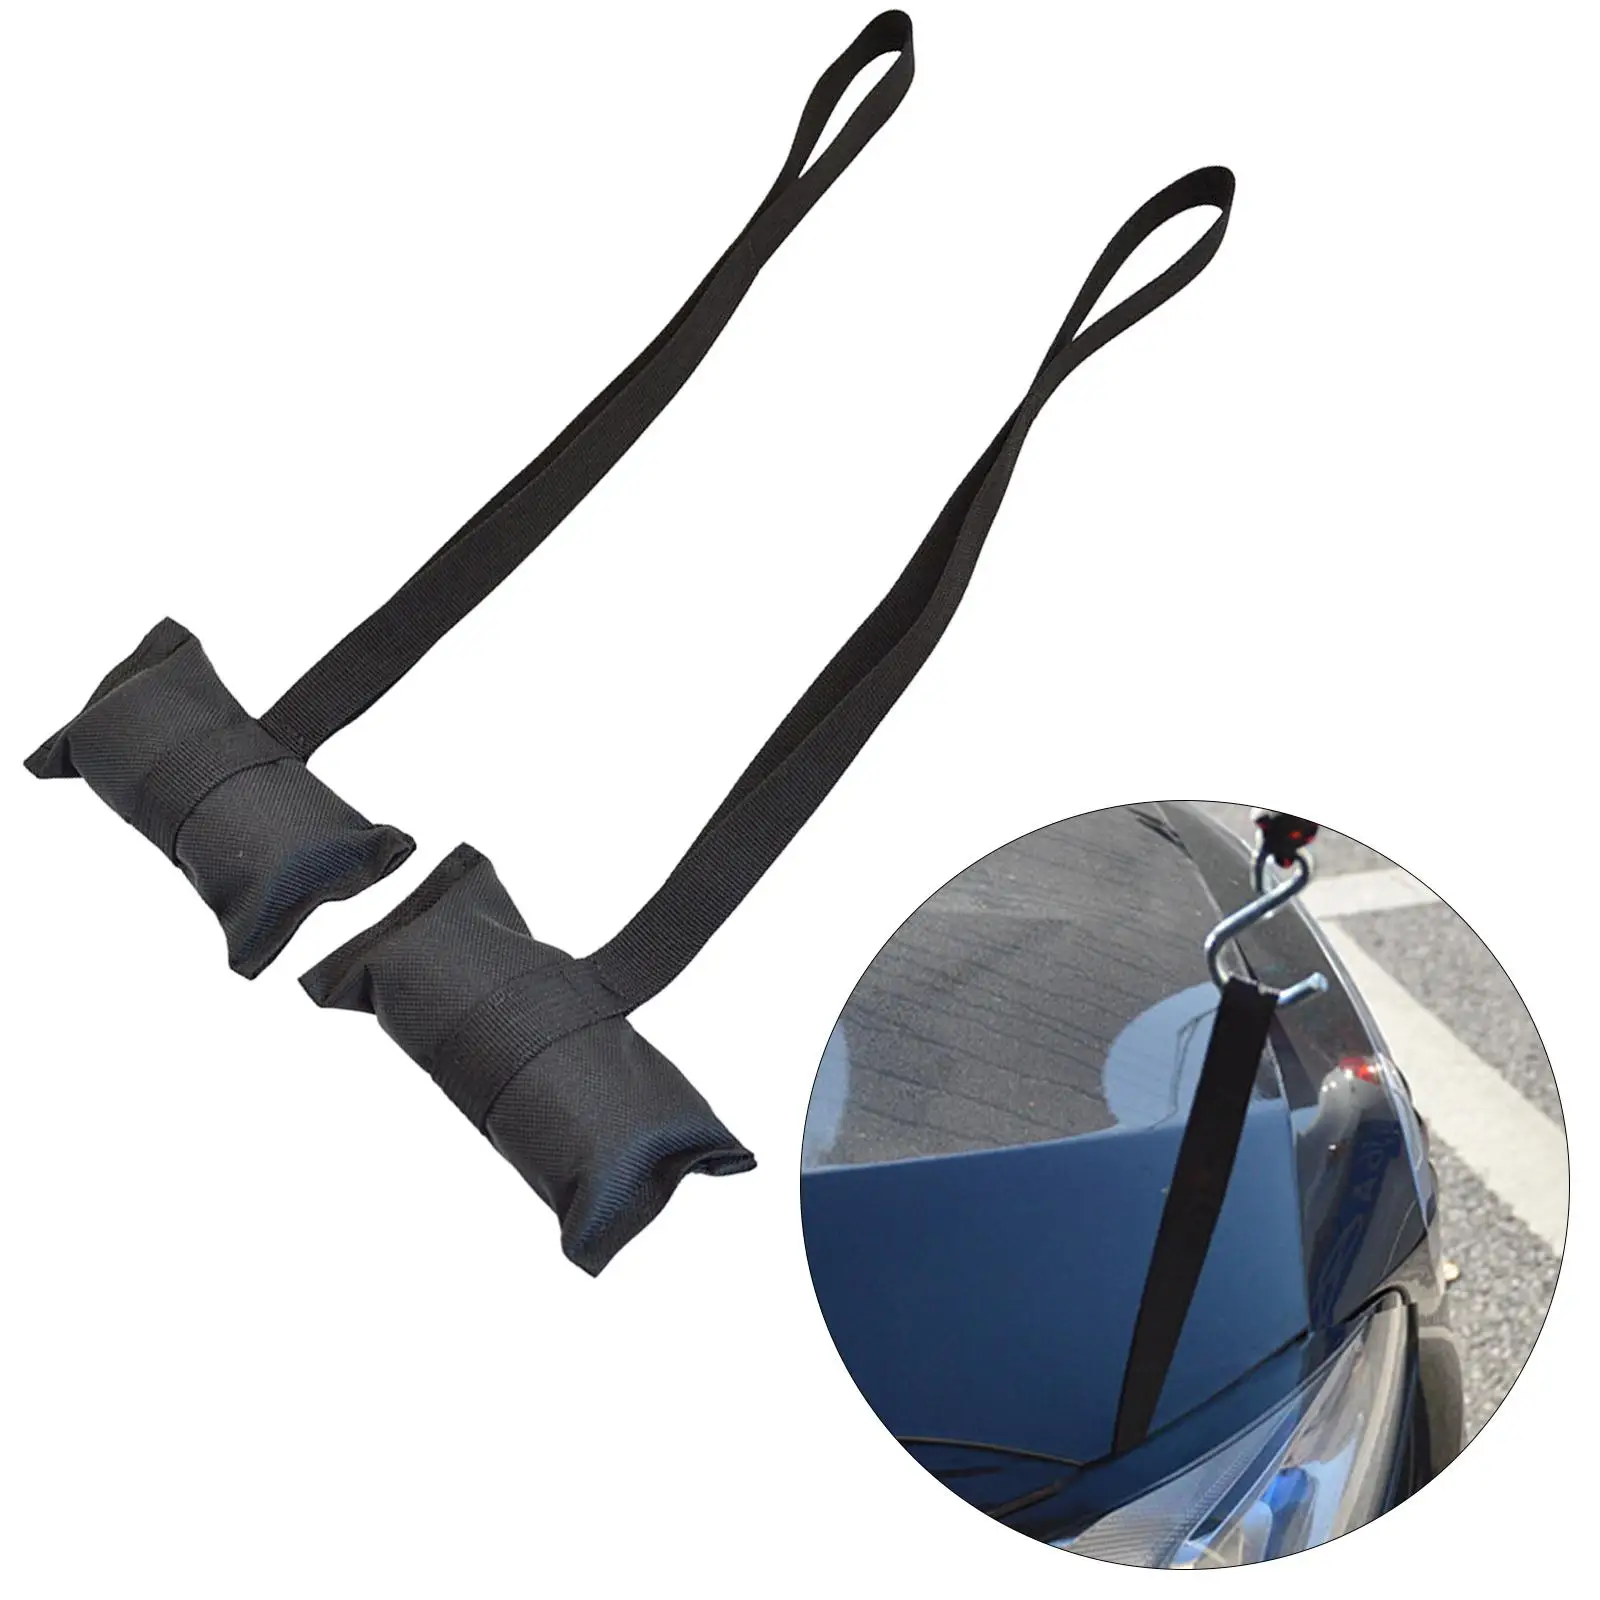 Anchors Tie Down Disassembly for Kayak Transport Bow Stern Car Hoods